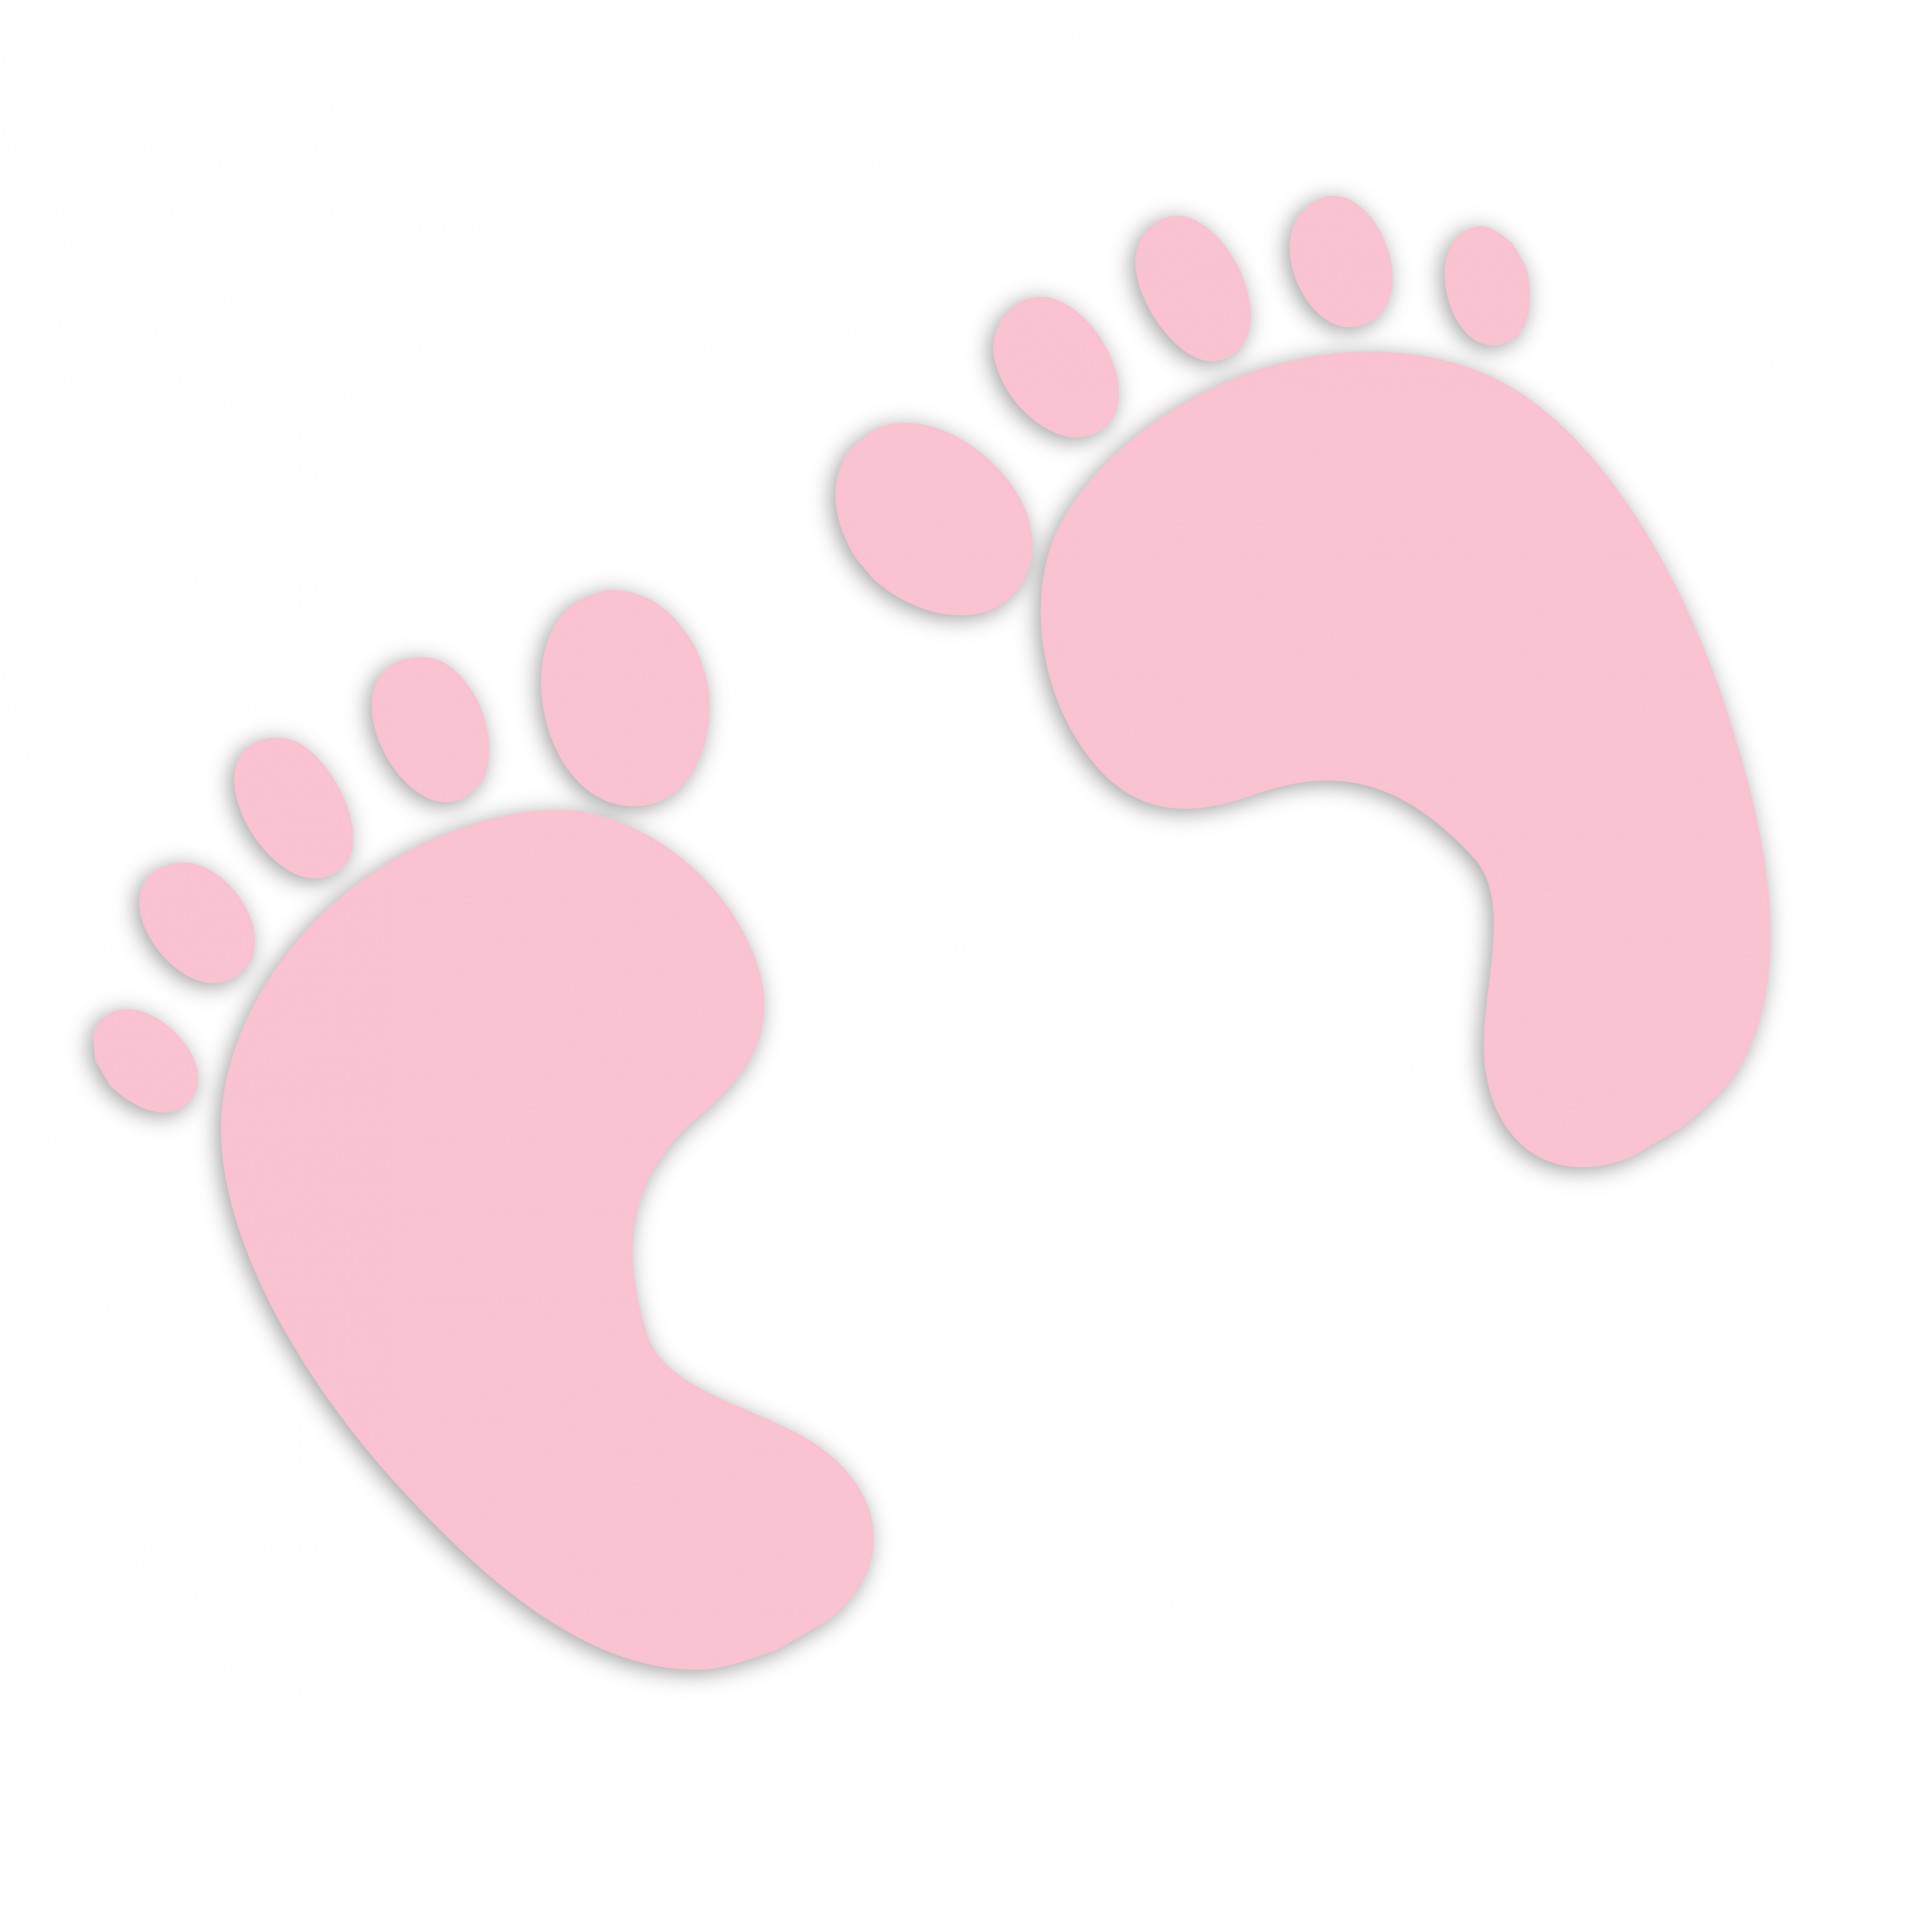 Baby Footprints Graphic